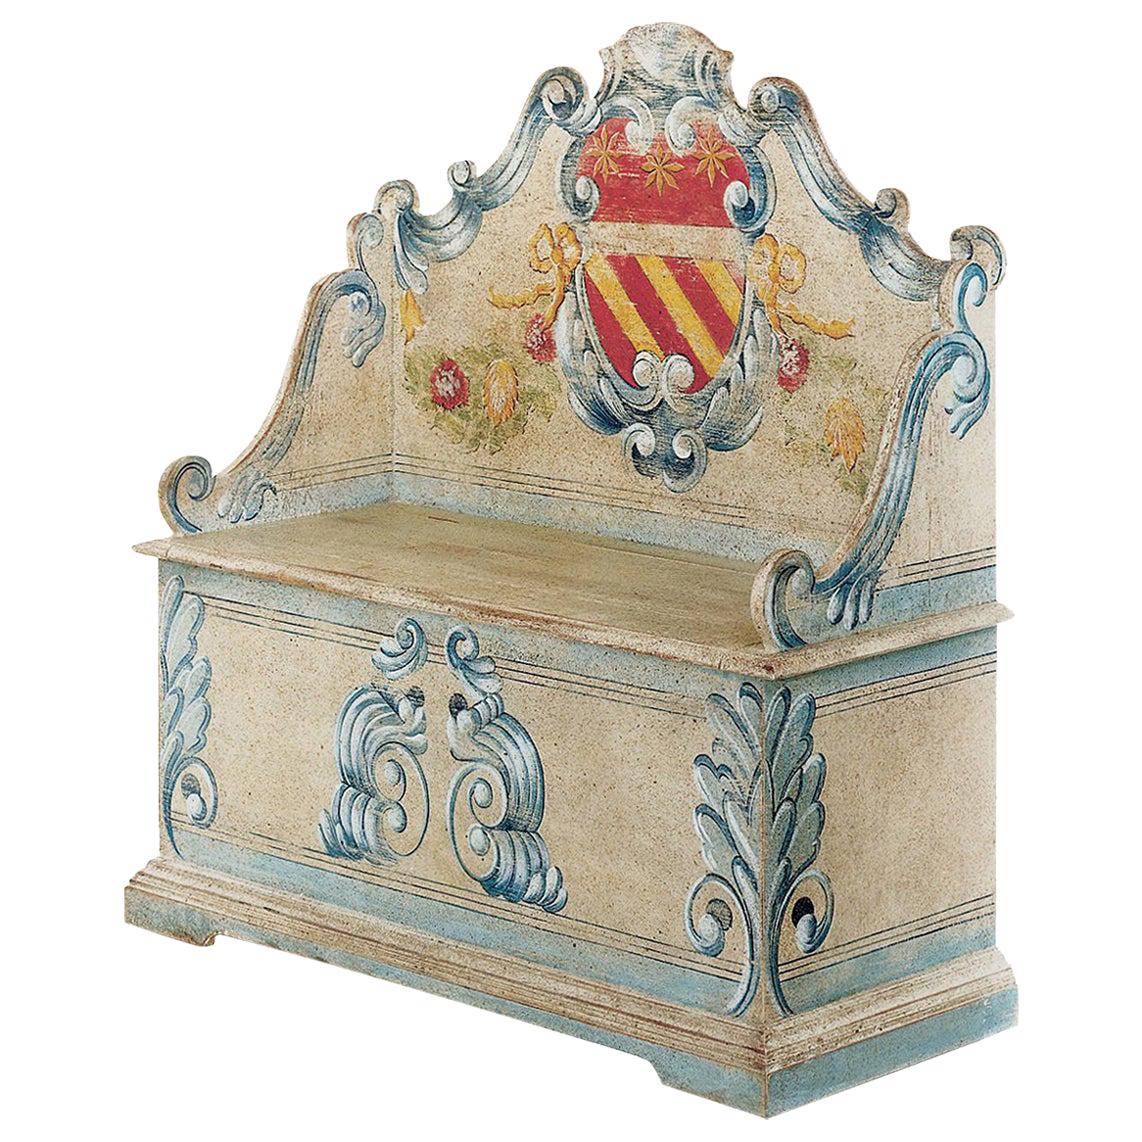 Blanket Chest with Crest Decoration